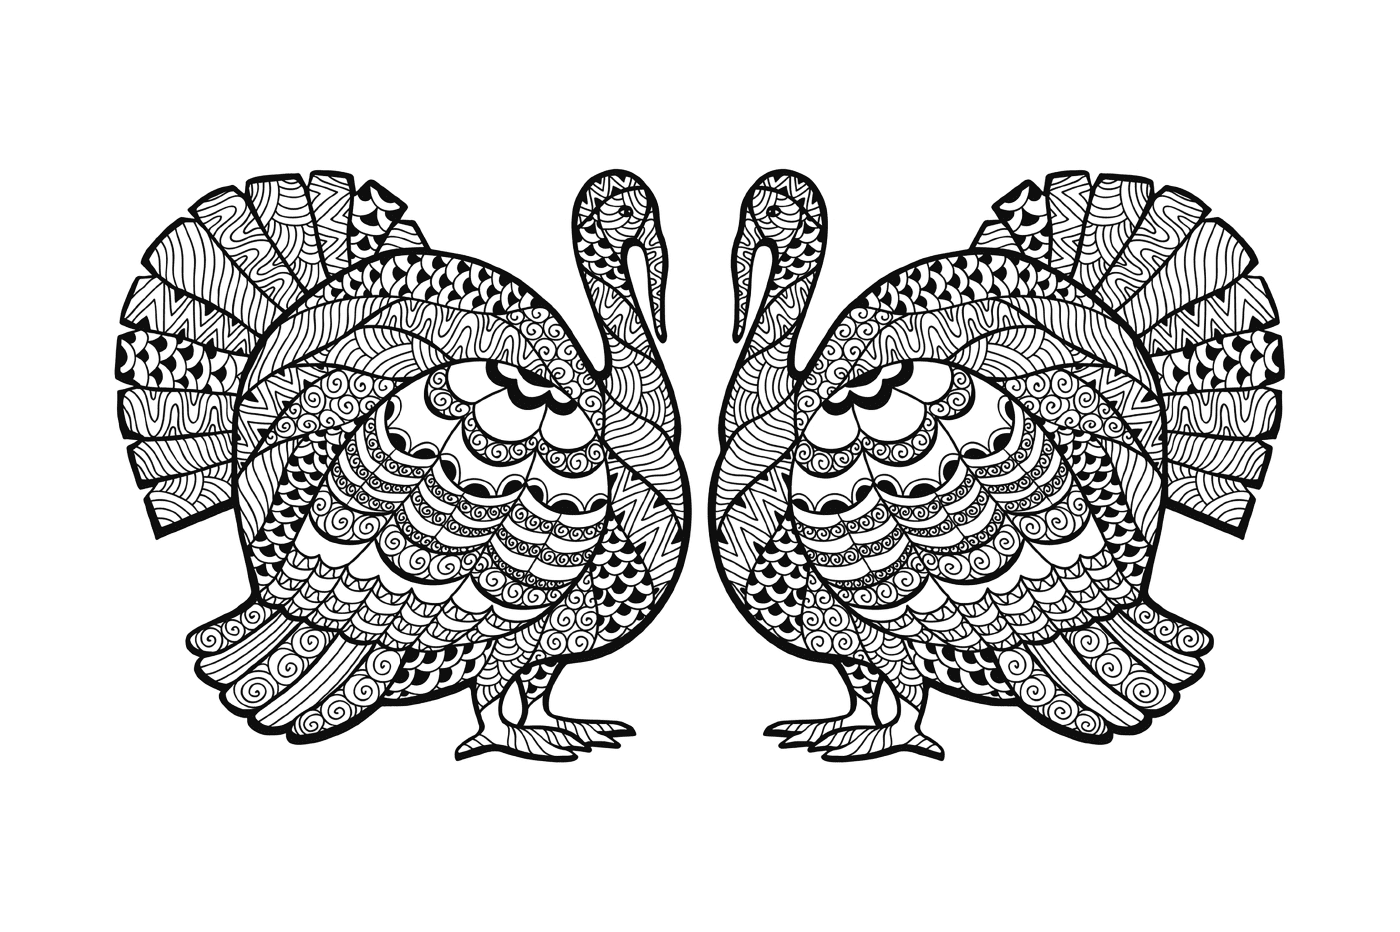  Two turkeys stand side by side 